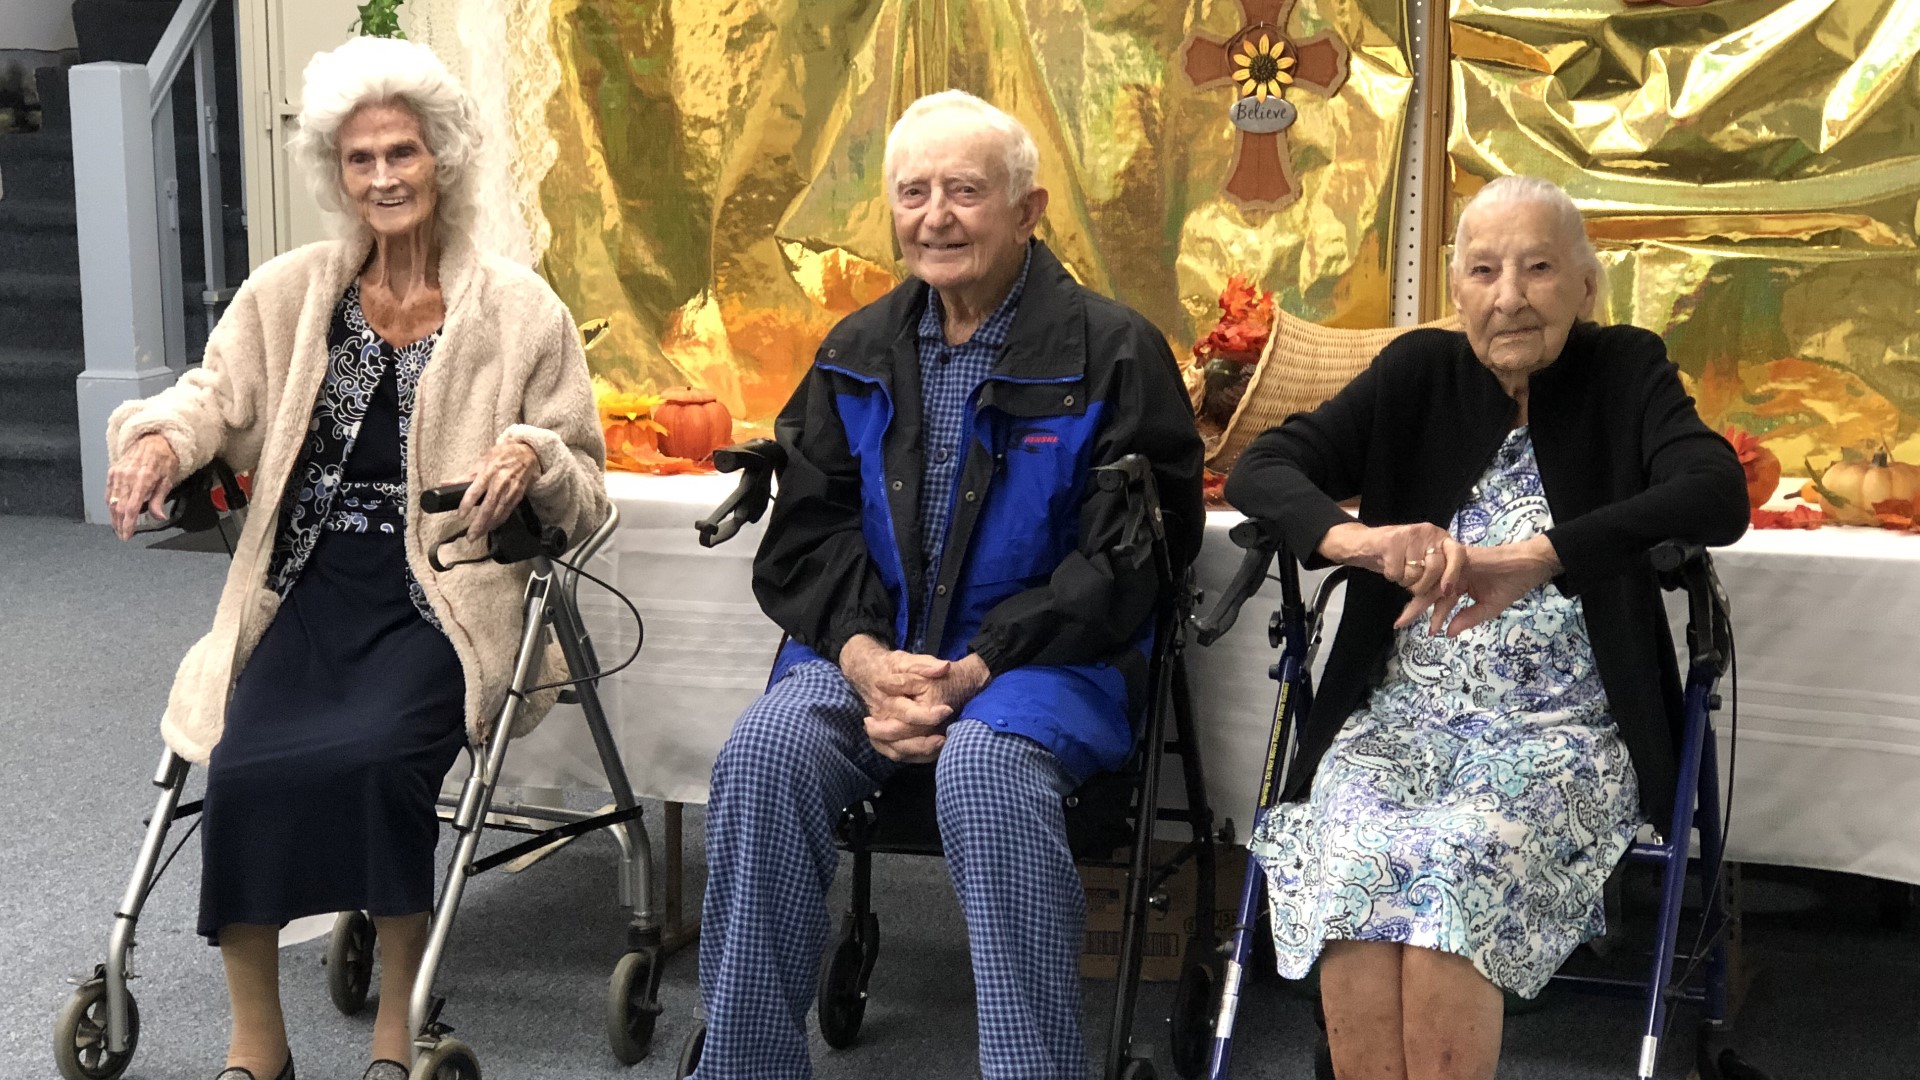 Three centenarians live in the small Franklin County town and all have birthdays within a day of each other.